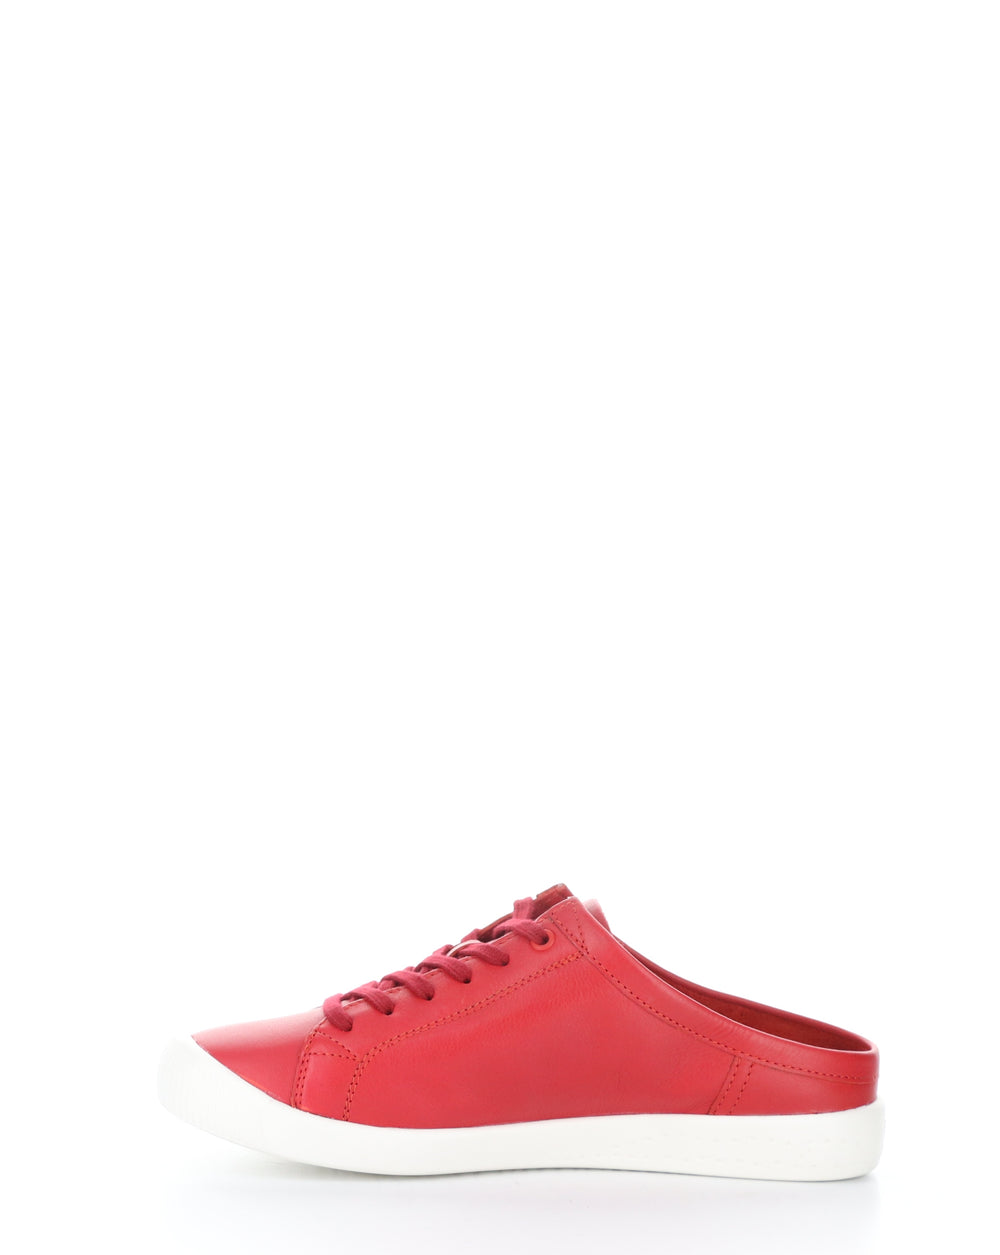 IDLE717SOF 004 CHERRY RED Slip-on Shoes